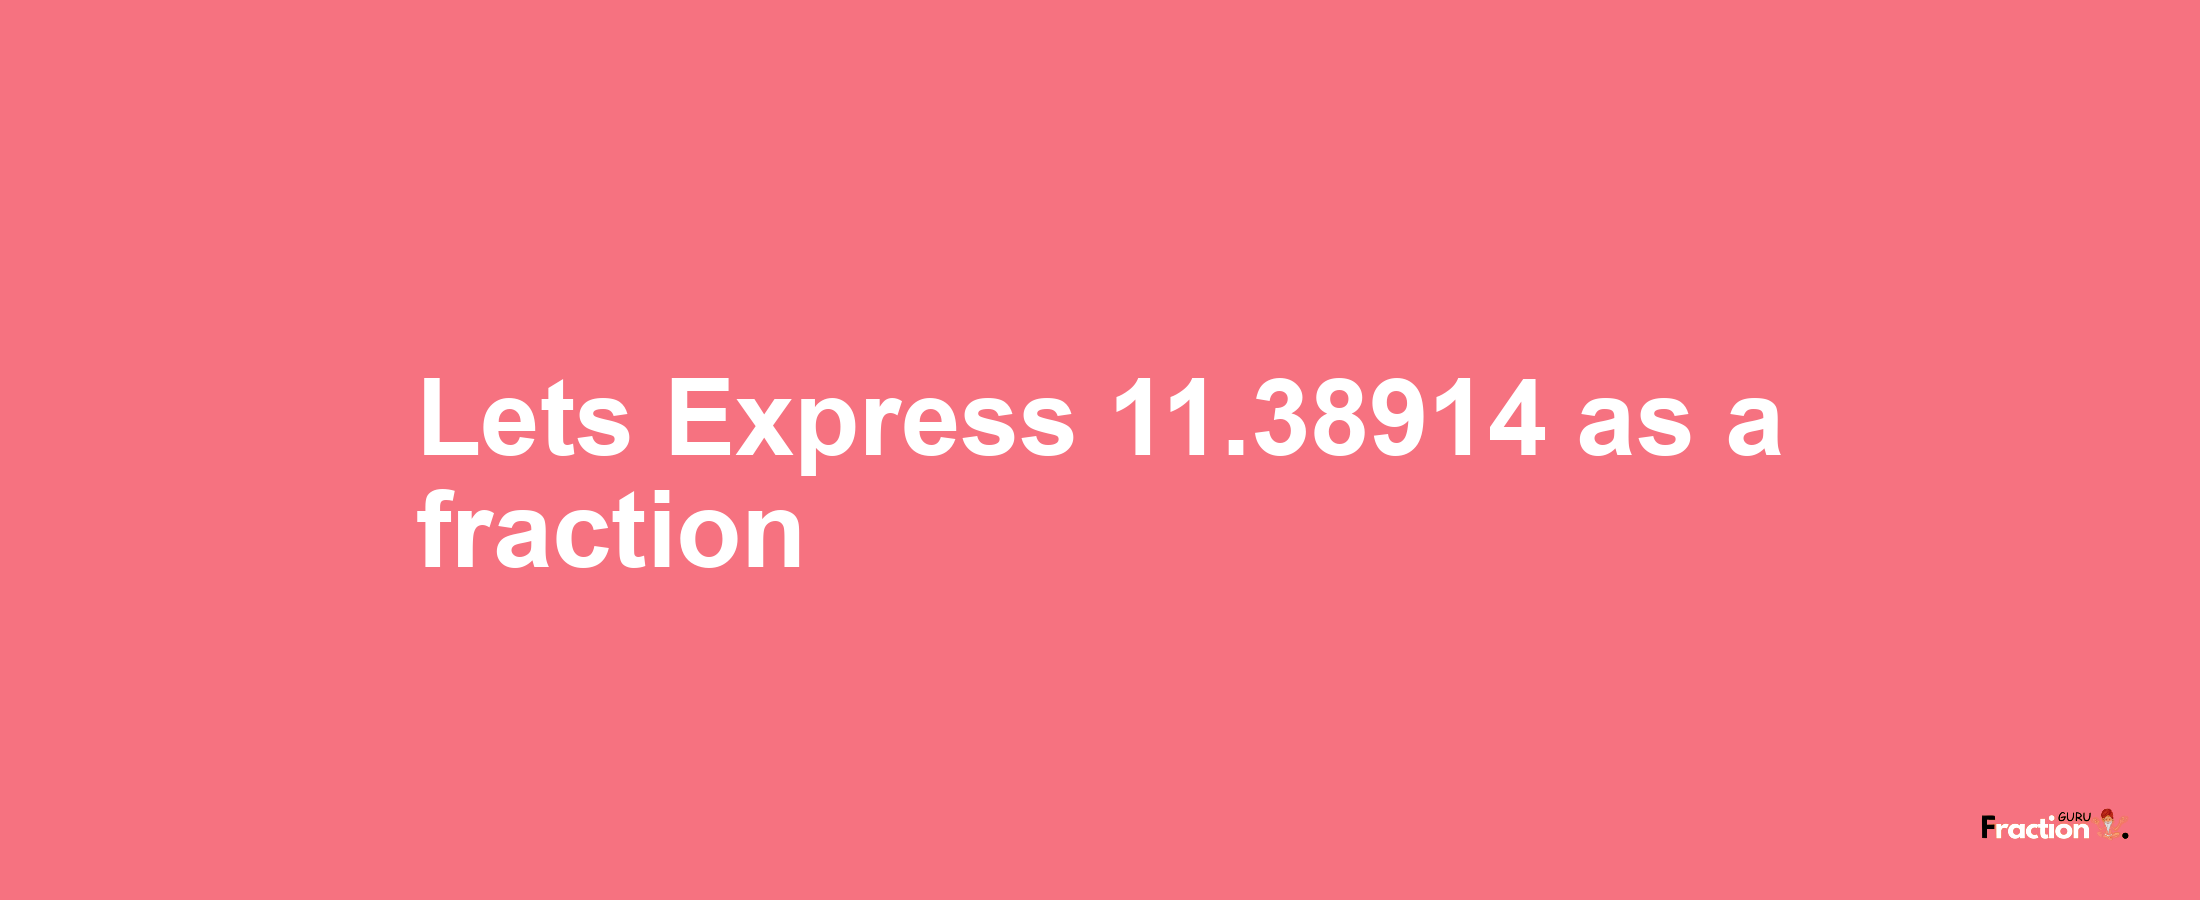 Lets Express 11.38914 as afraction